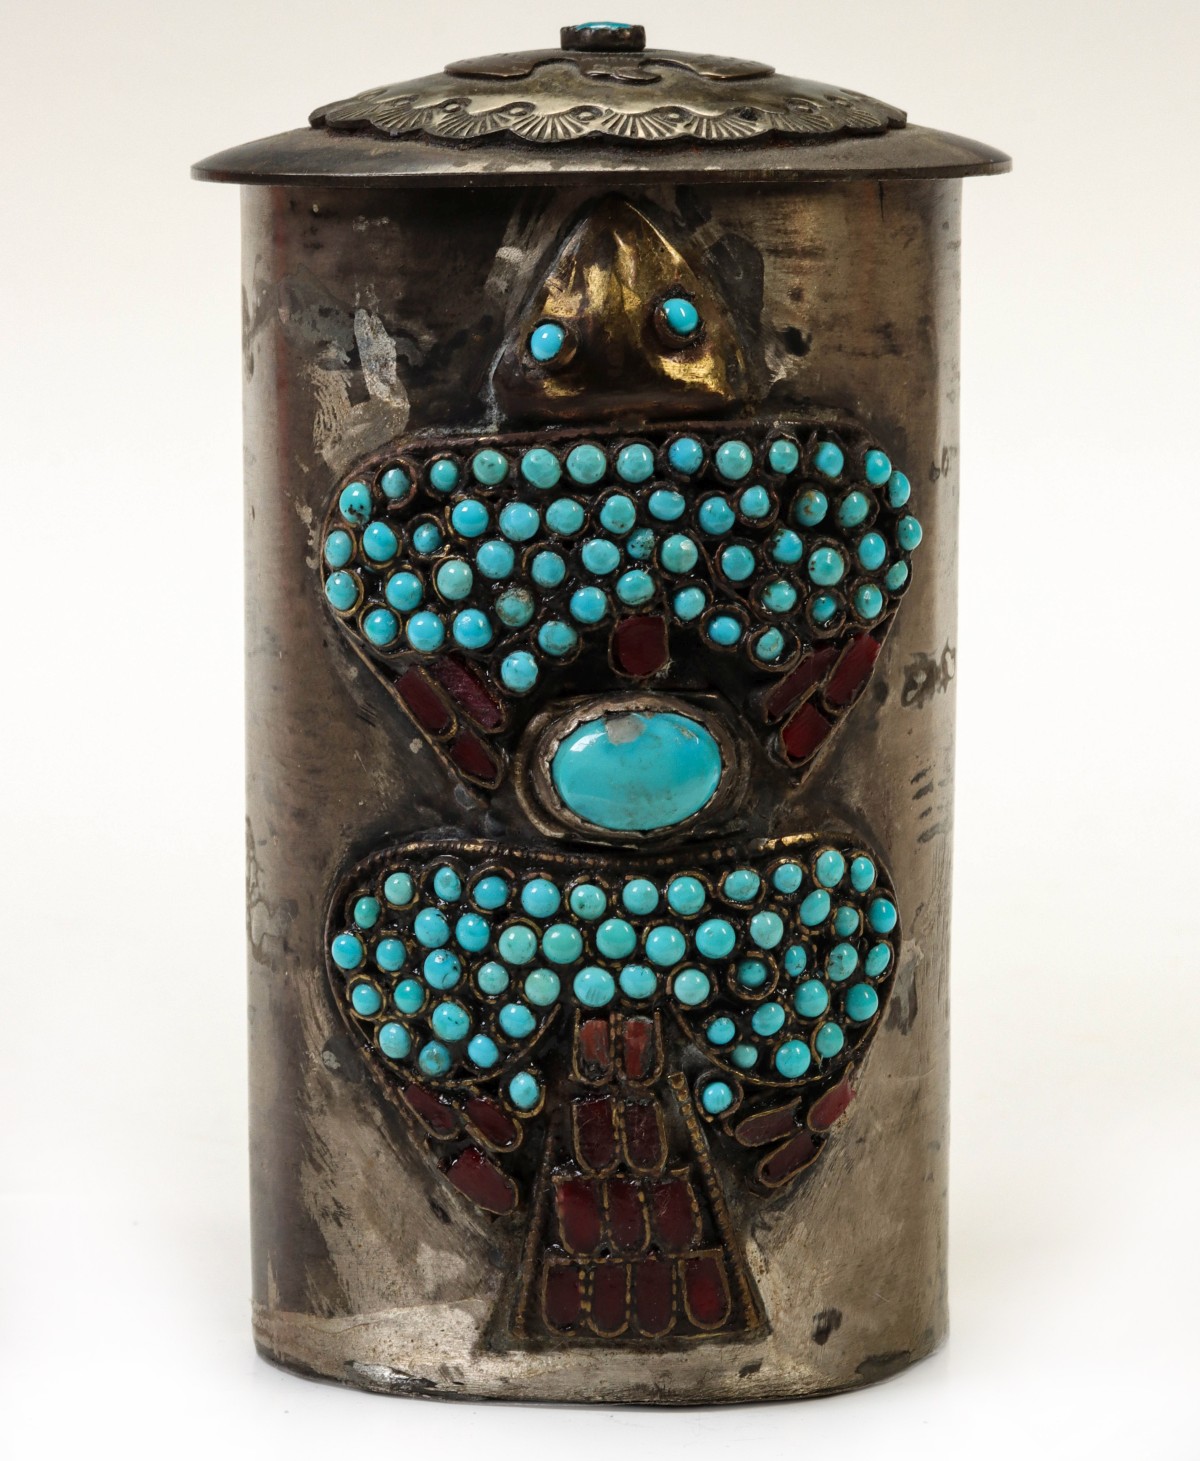 A METALWORK CONTAINER WITH TURQUOISE AND ATTRIBUTION